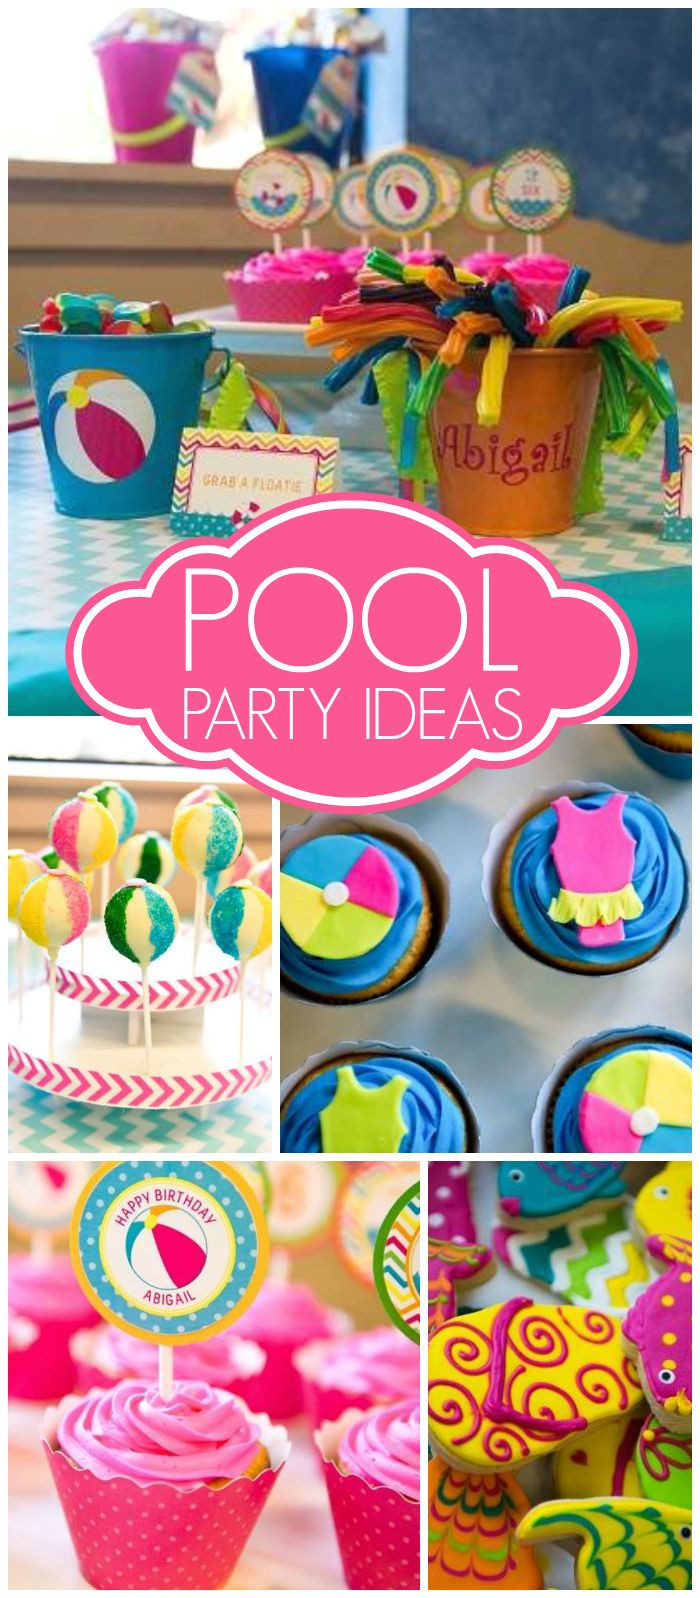 Ideas For A Trolls Pool Party
 Love this bright and cheery hot pink and turquoise pool